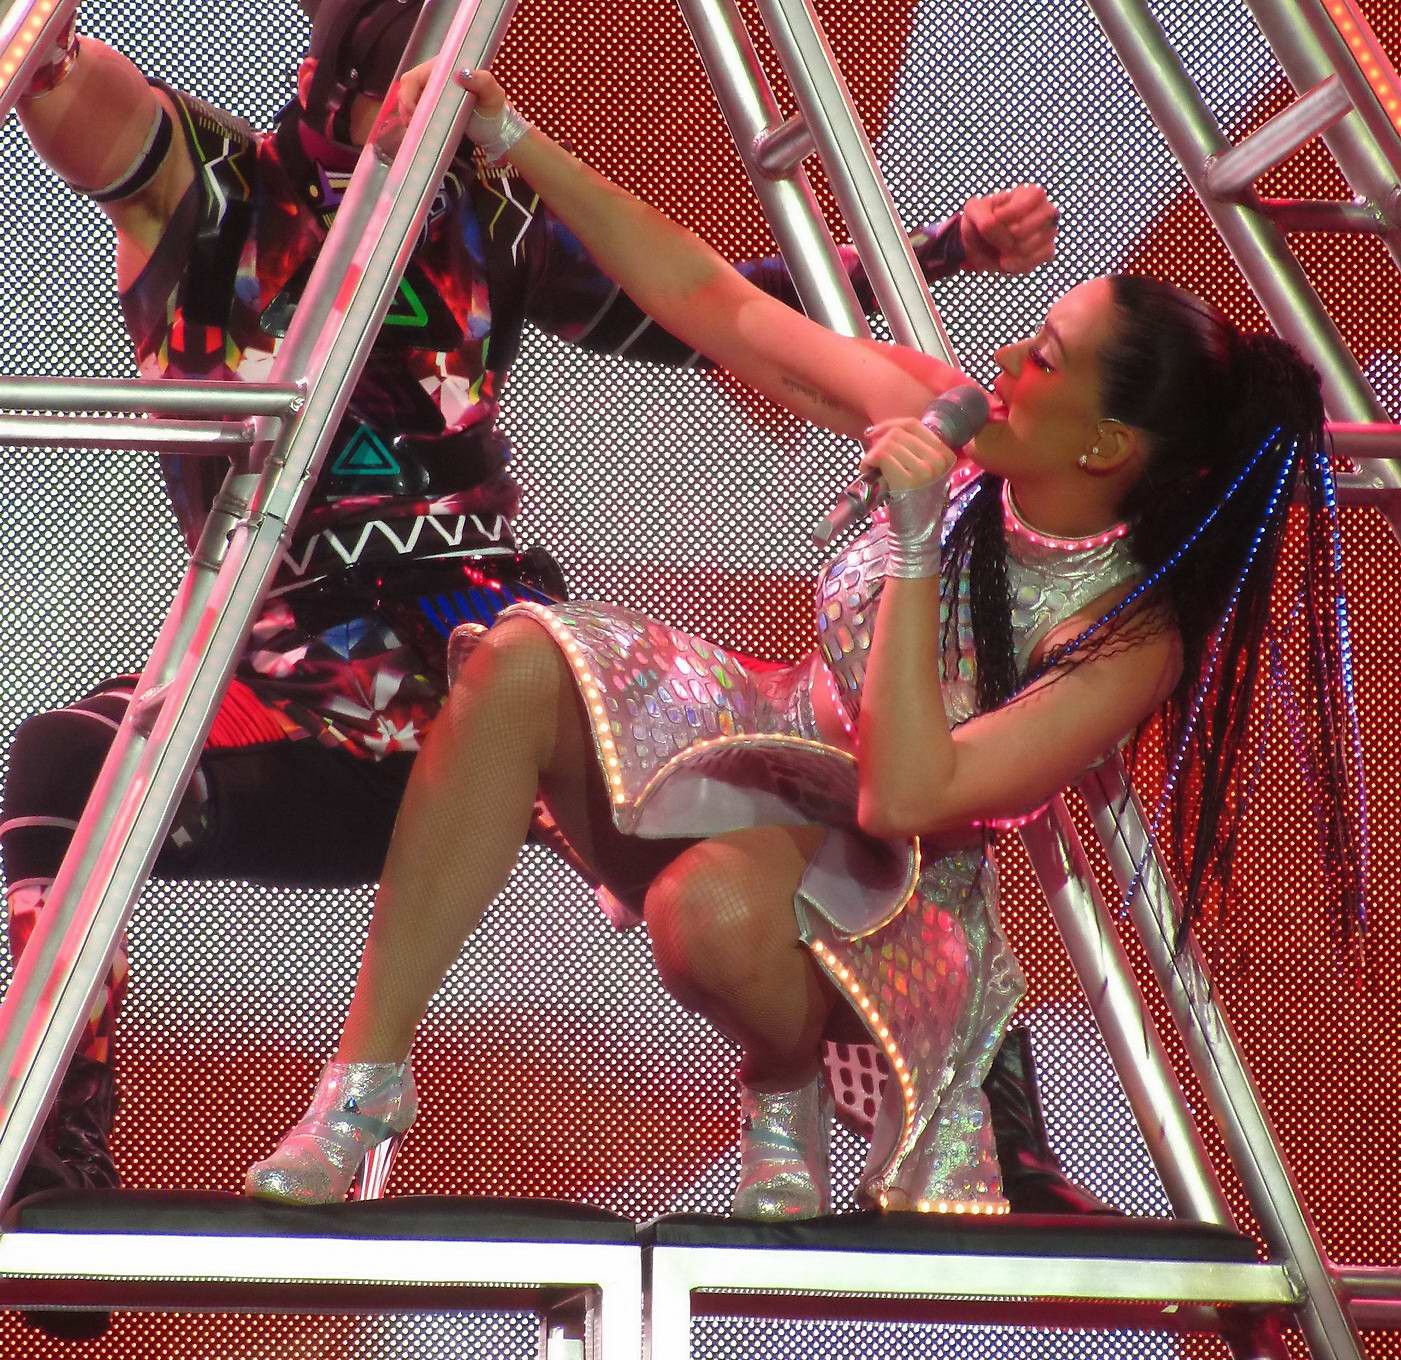 Katy Perry upskirt on stage at the Prismatic tour in Belfast